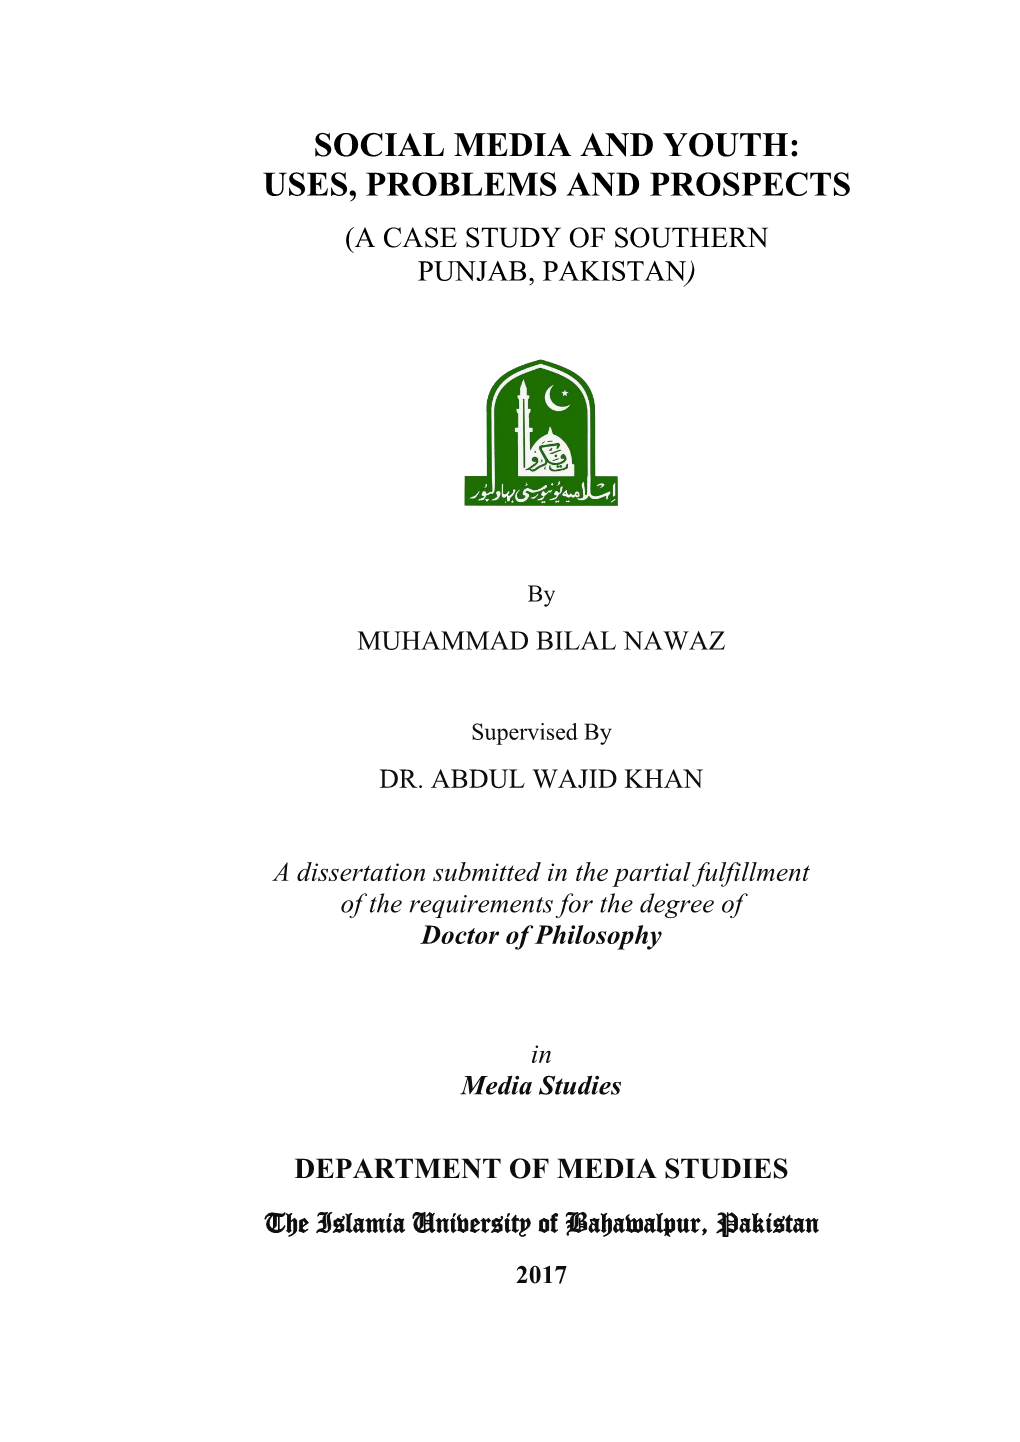 Social Media and Youth: Uses, Problems and Prospects (A Case Study of Southern Punjab, Pakistan)